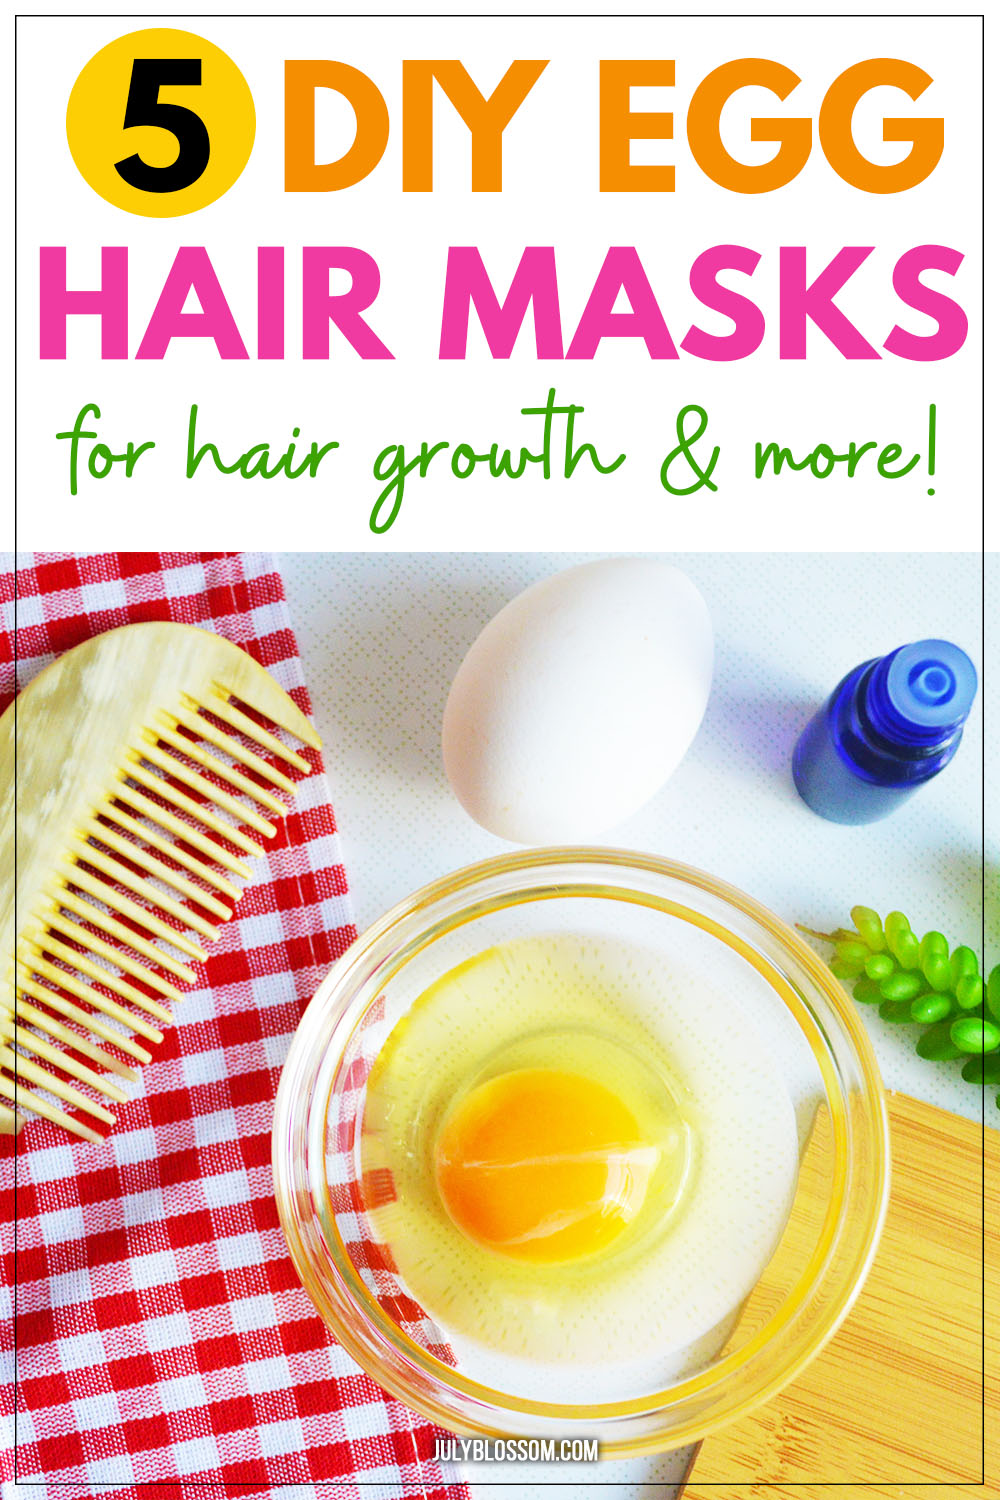 egg hair mask for hair growth Archives - ♡ July Blossom ♡